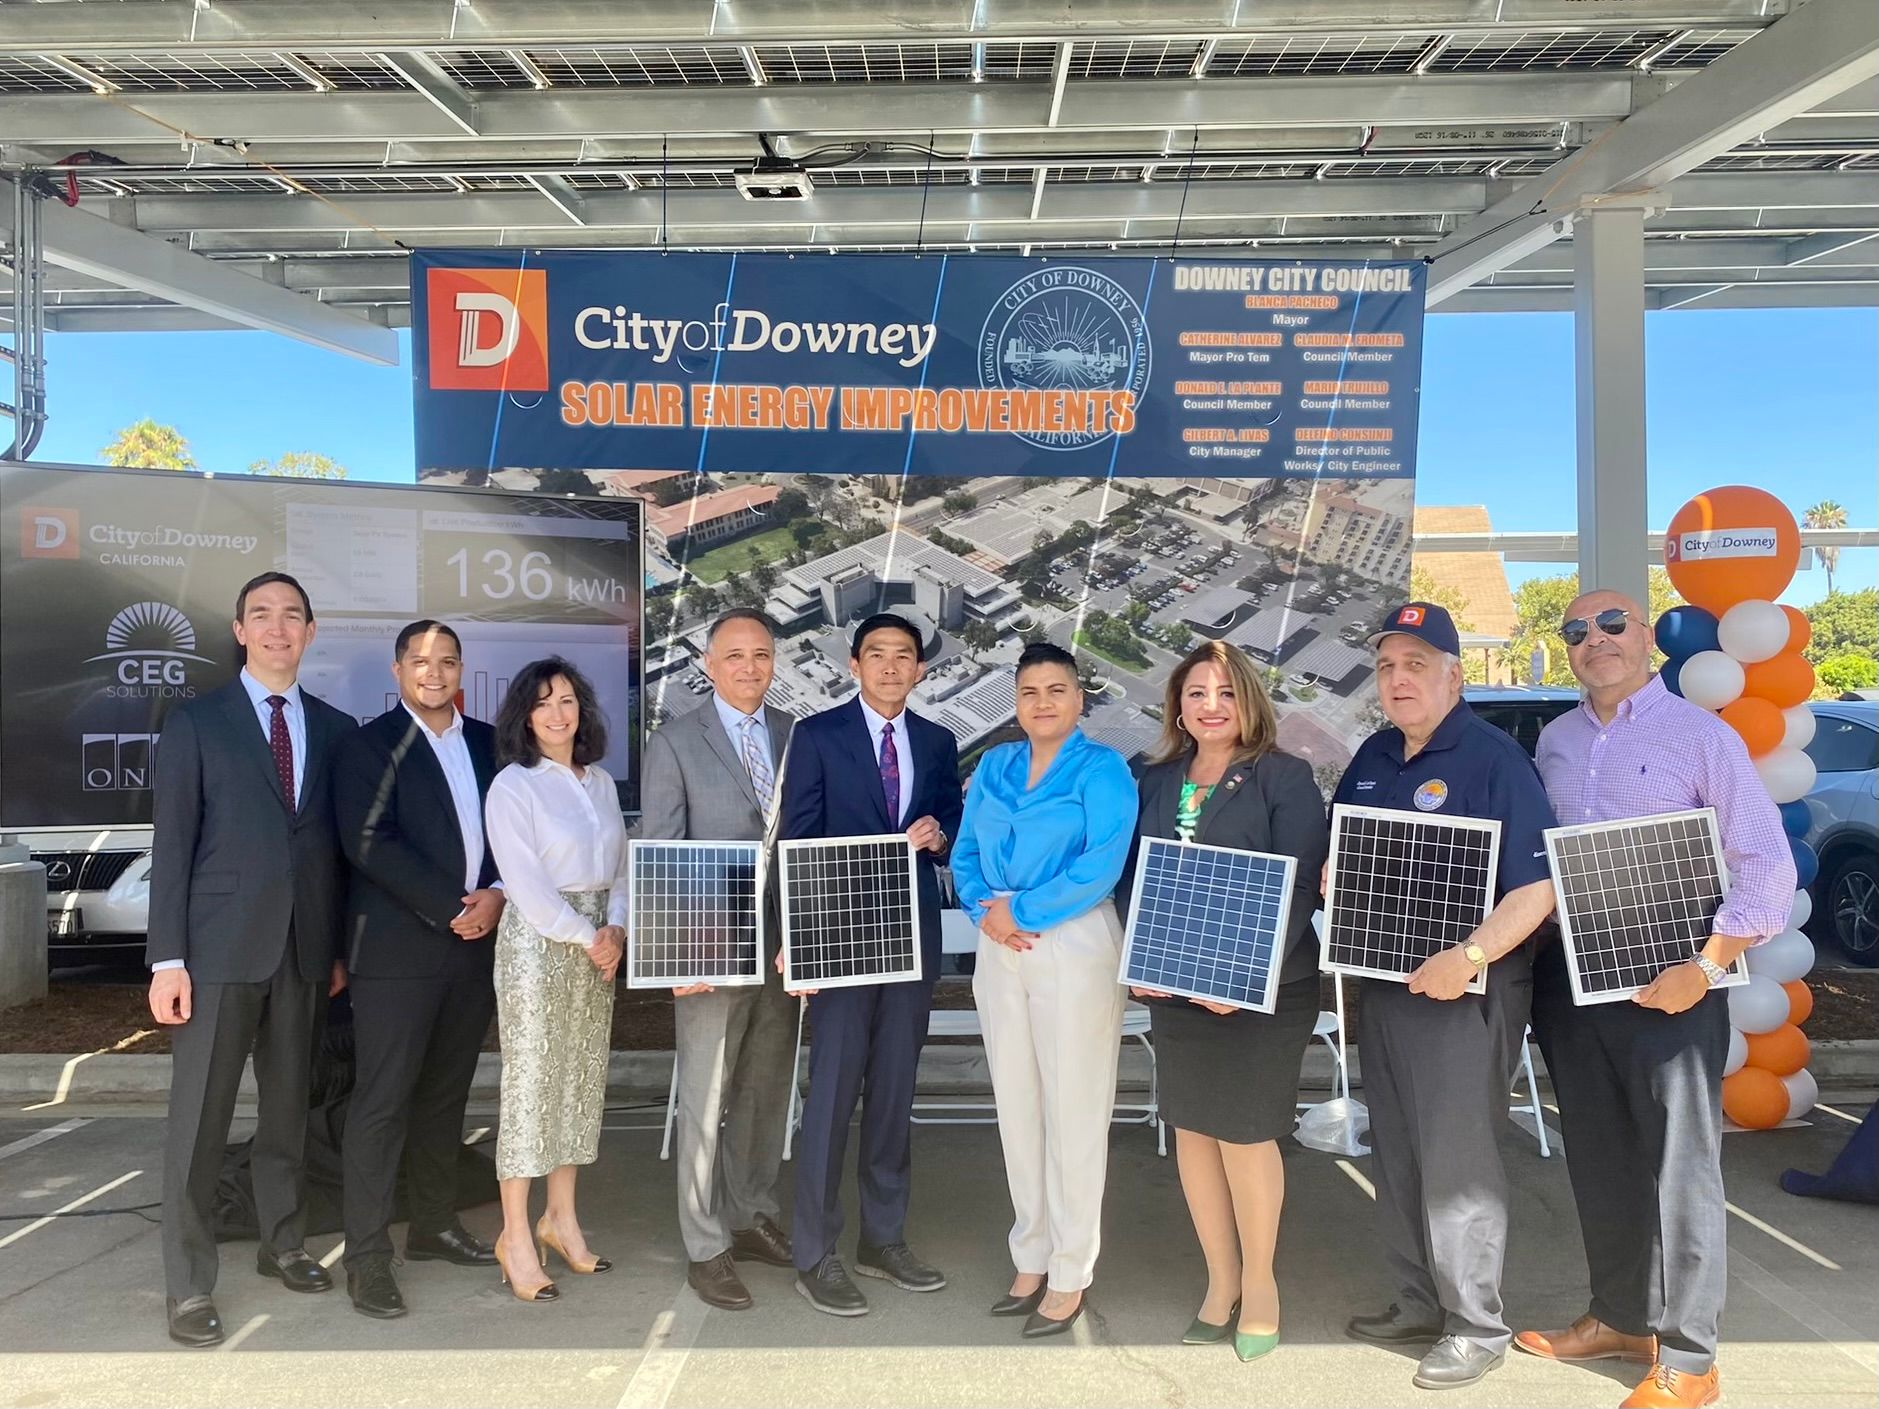 Onyx CEO Mary Beth Mandanas and City of Downey personnel at ribbon cutting event for solar energy project - Onyx Renewables